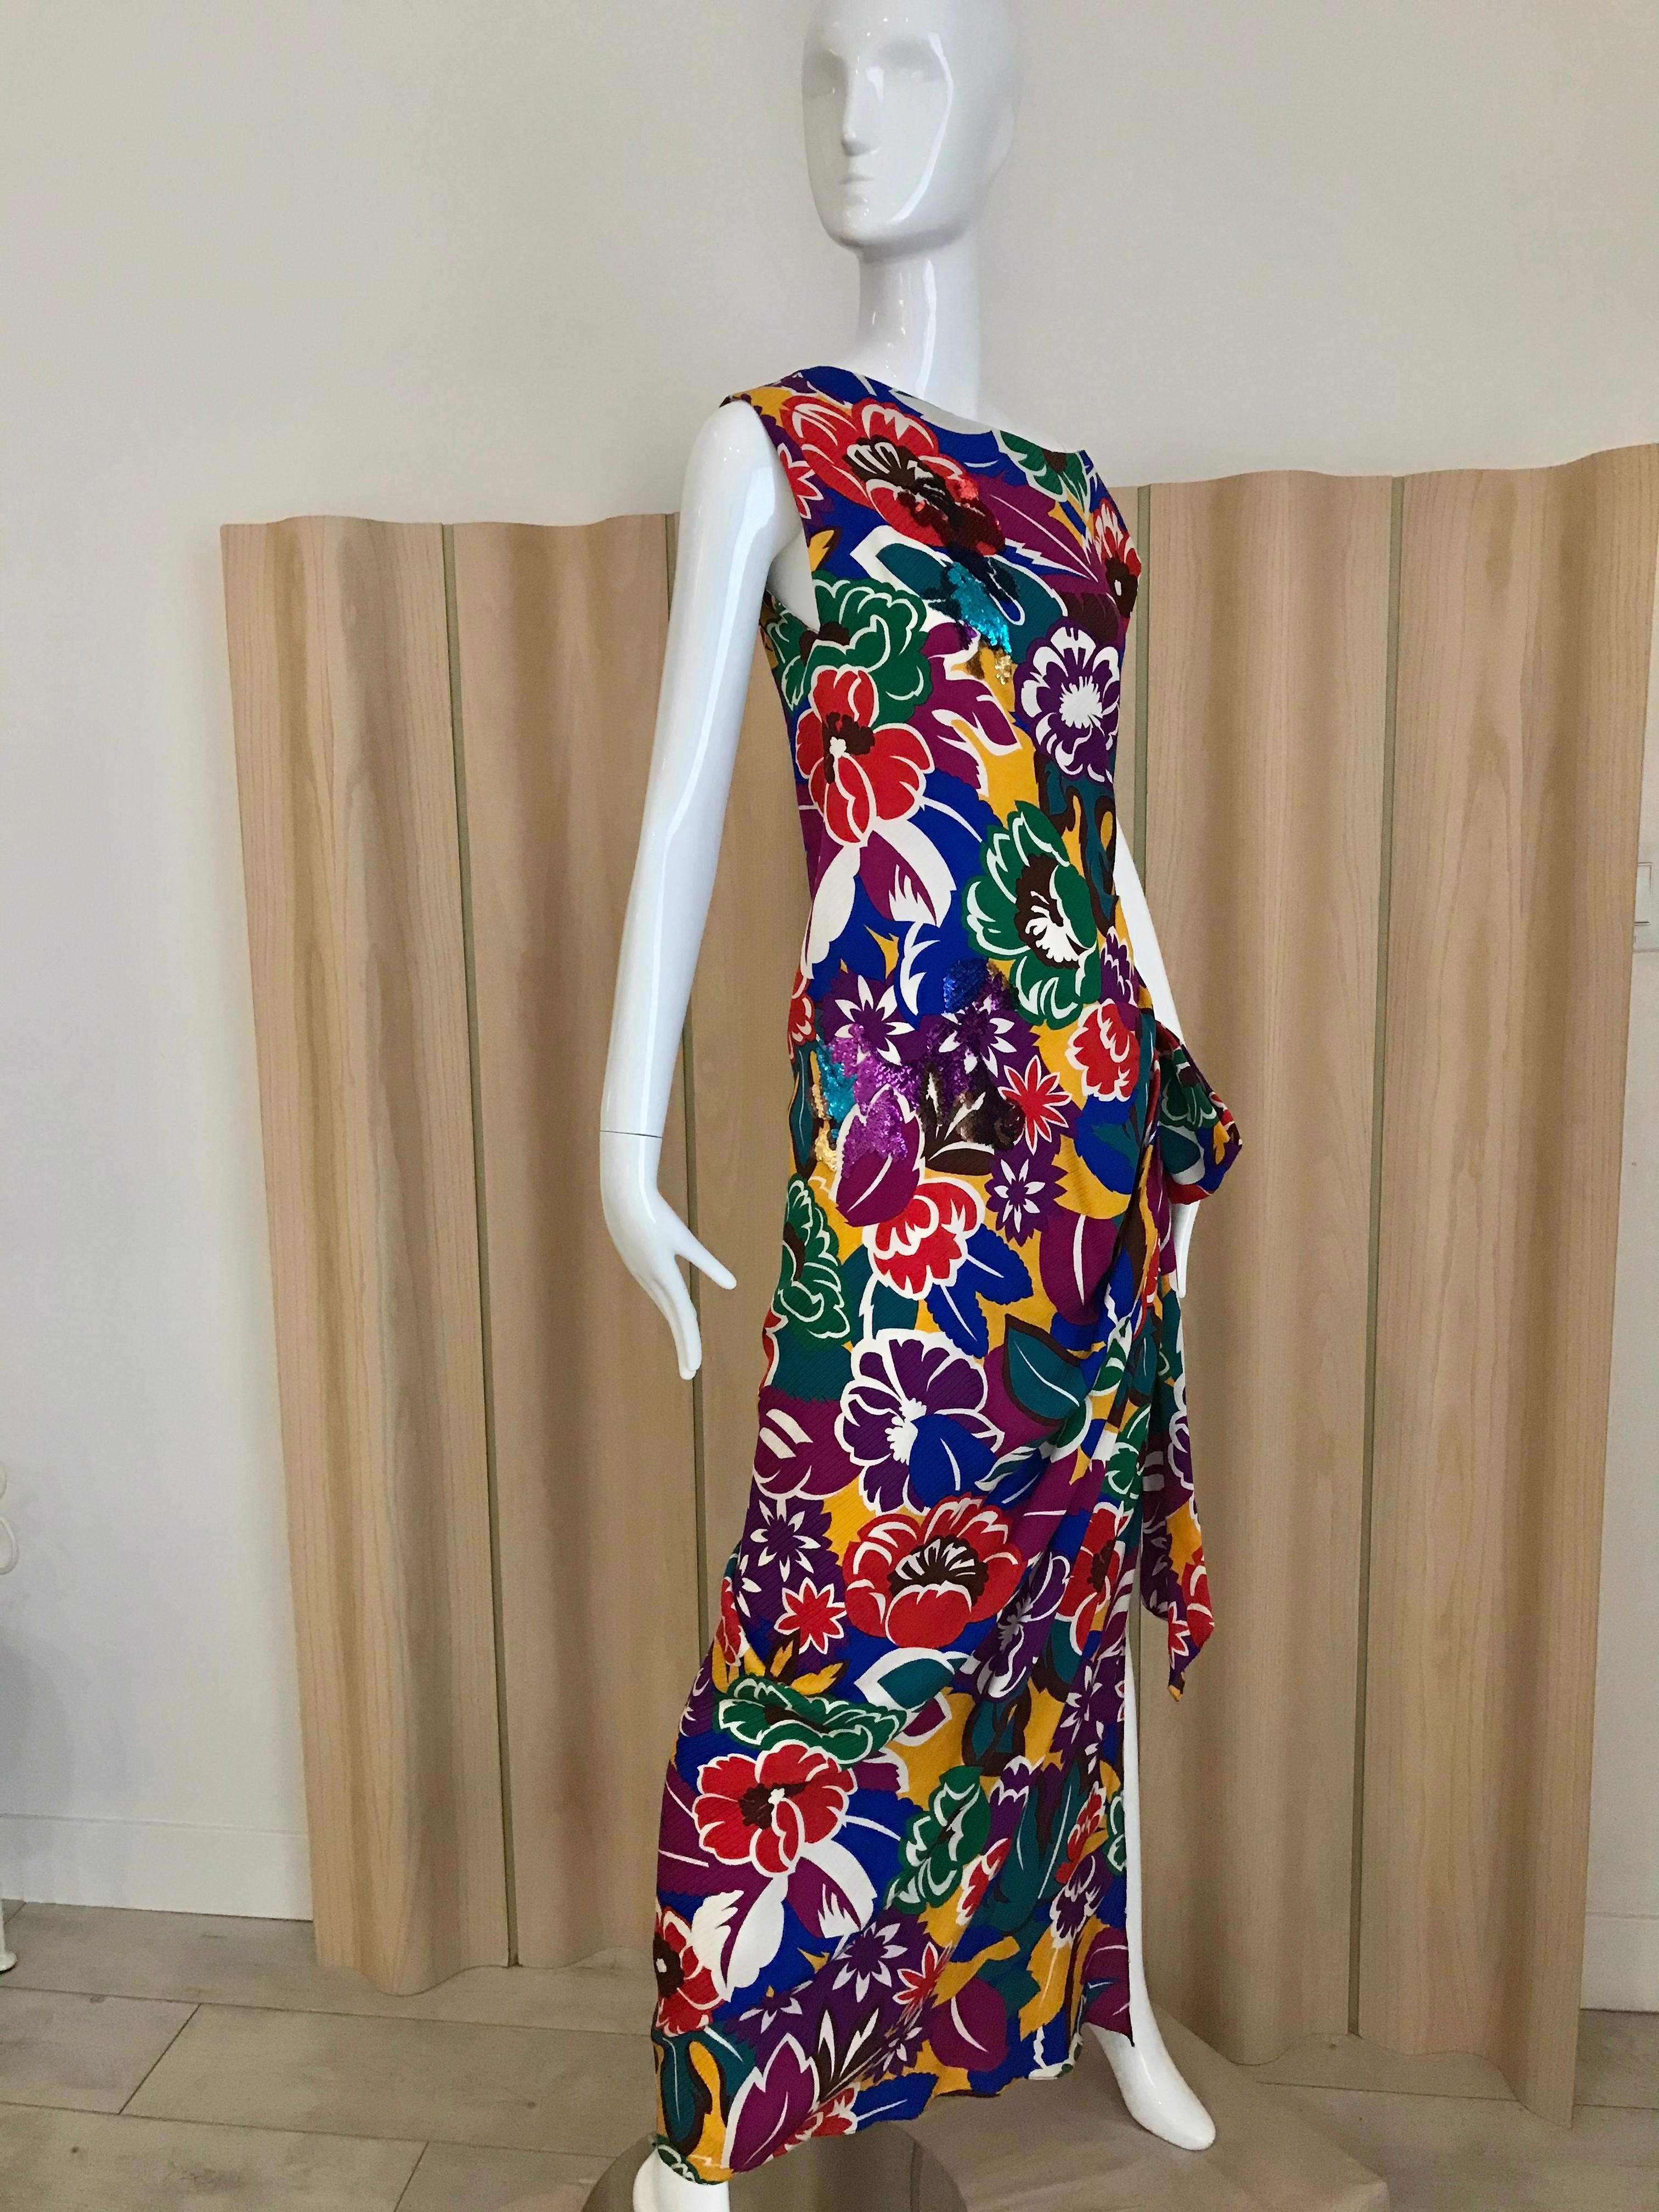 Vintage Oscar De La RENTA Vibrant multi color floral print dress in purple, green , turquoise, orange, blue and magenta silk print dress with sequins and bow. Dress has side slit with bow. 
Size: Medium
Bust: 36 inches/ Waist: 30 inches/ Dress